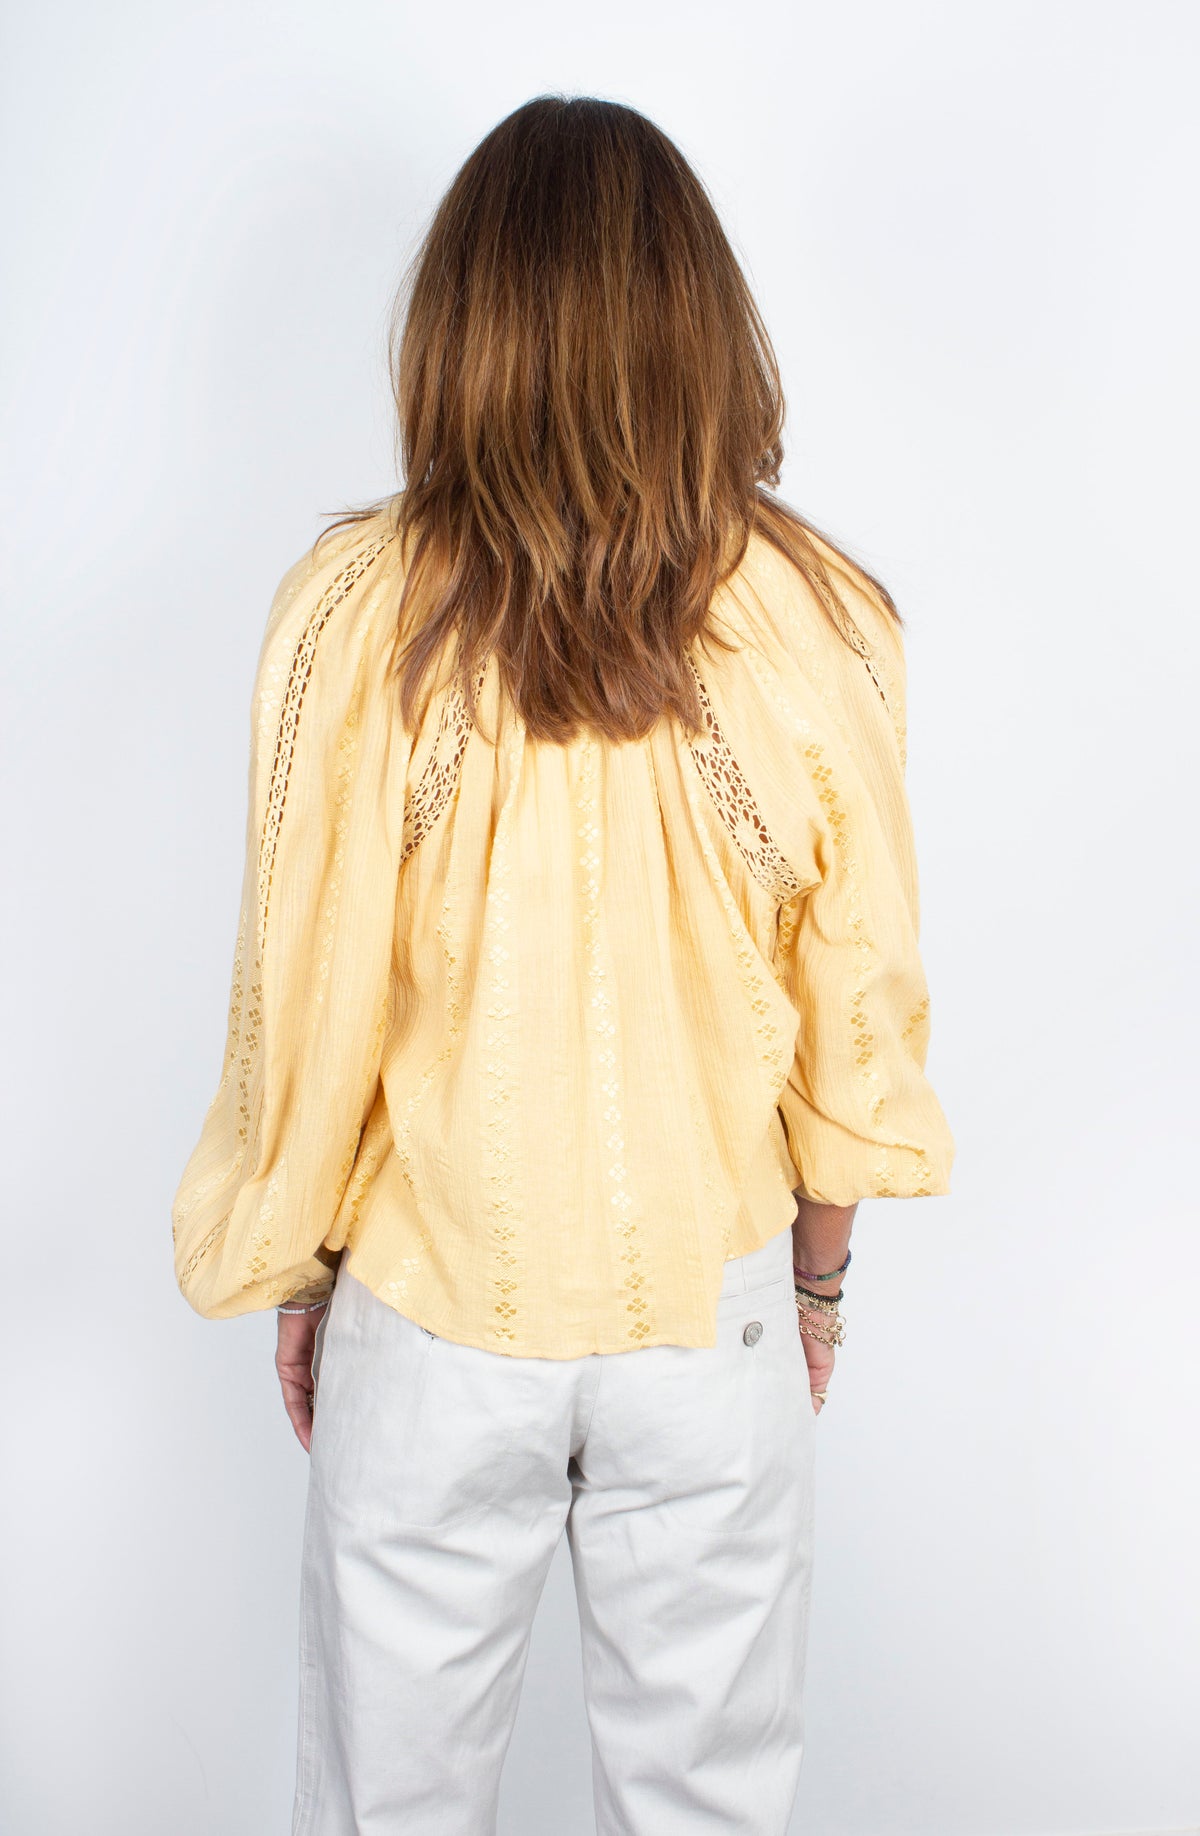 IM Janelle Lacy Cotton Blouse in Honey